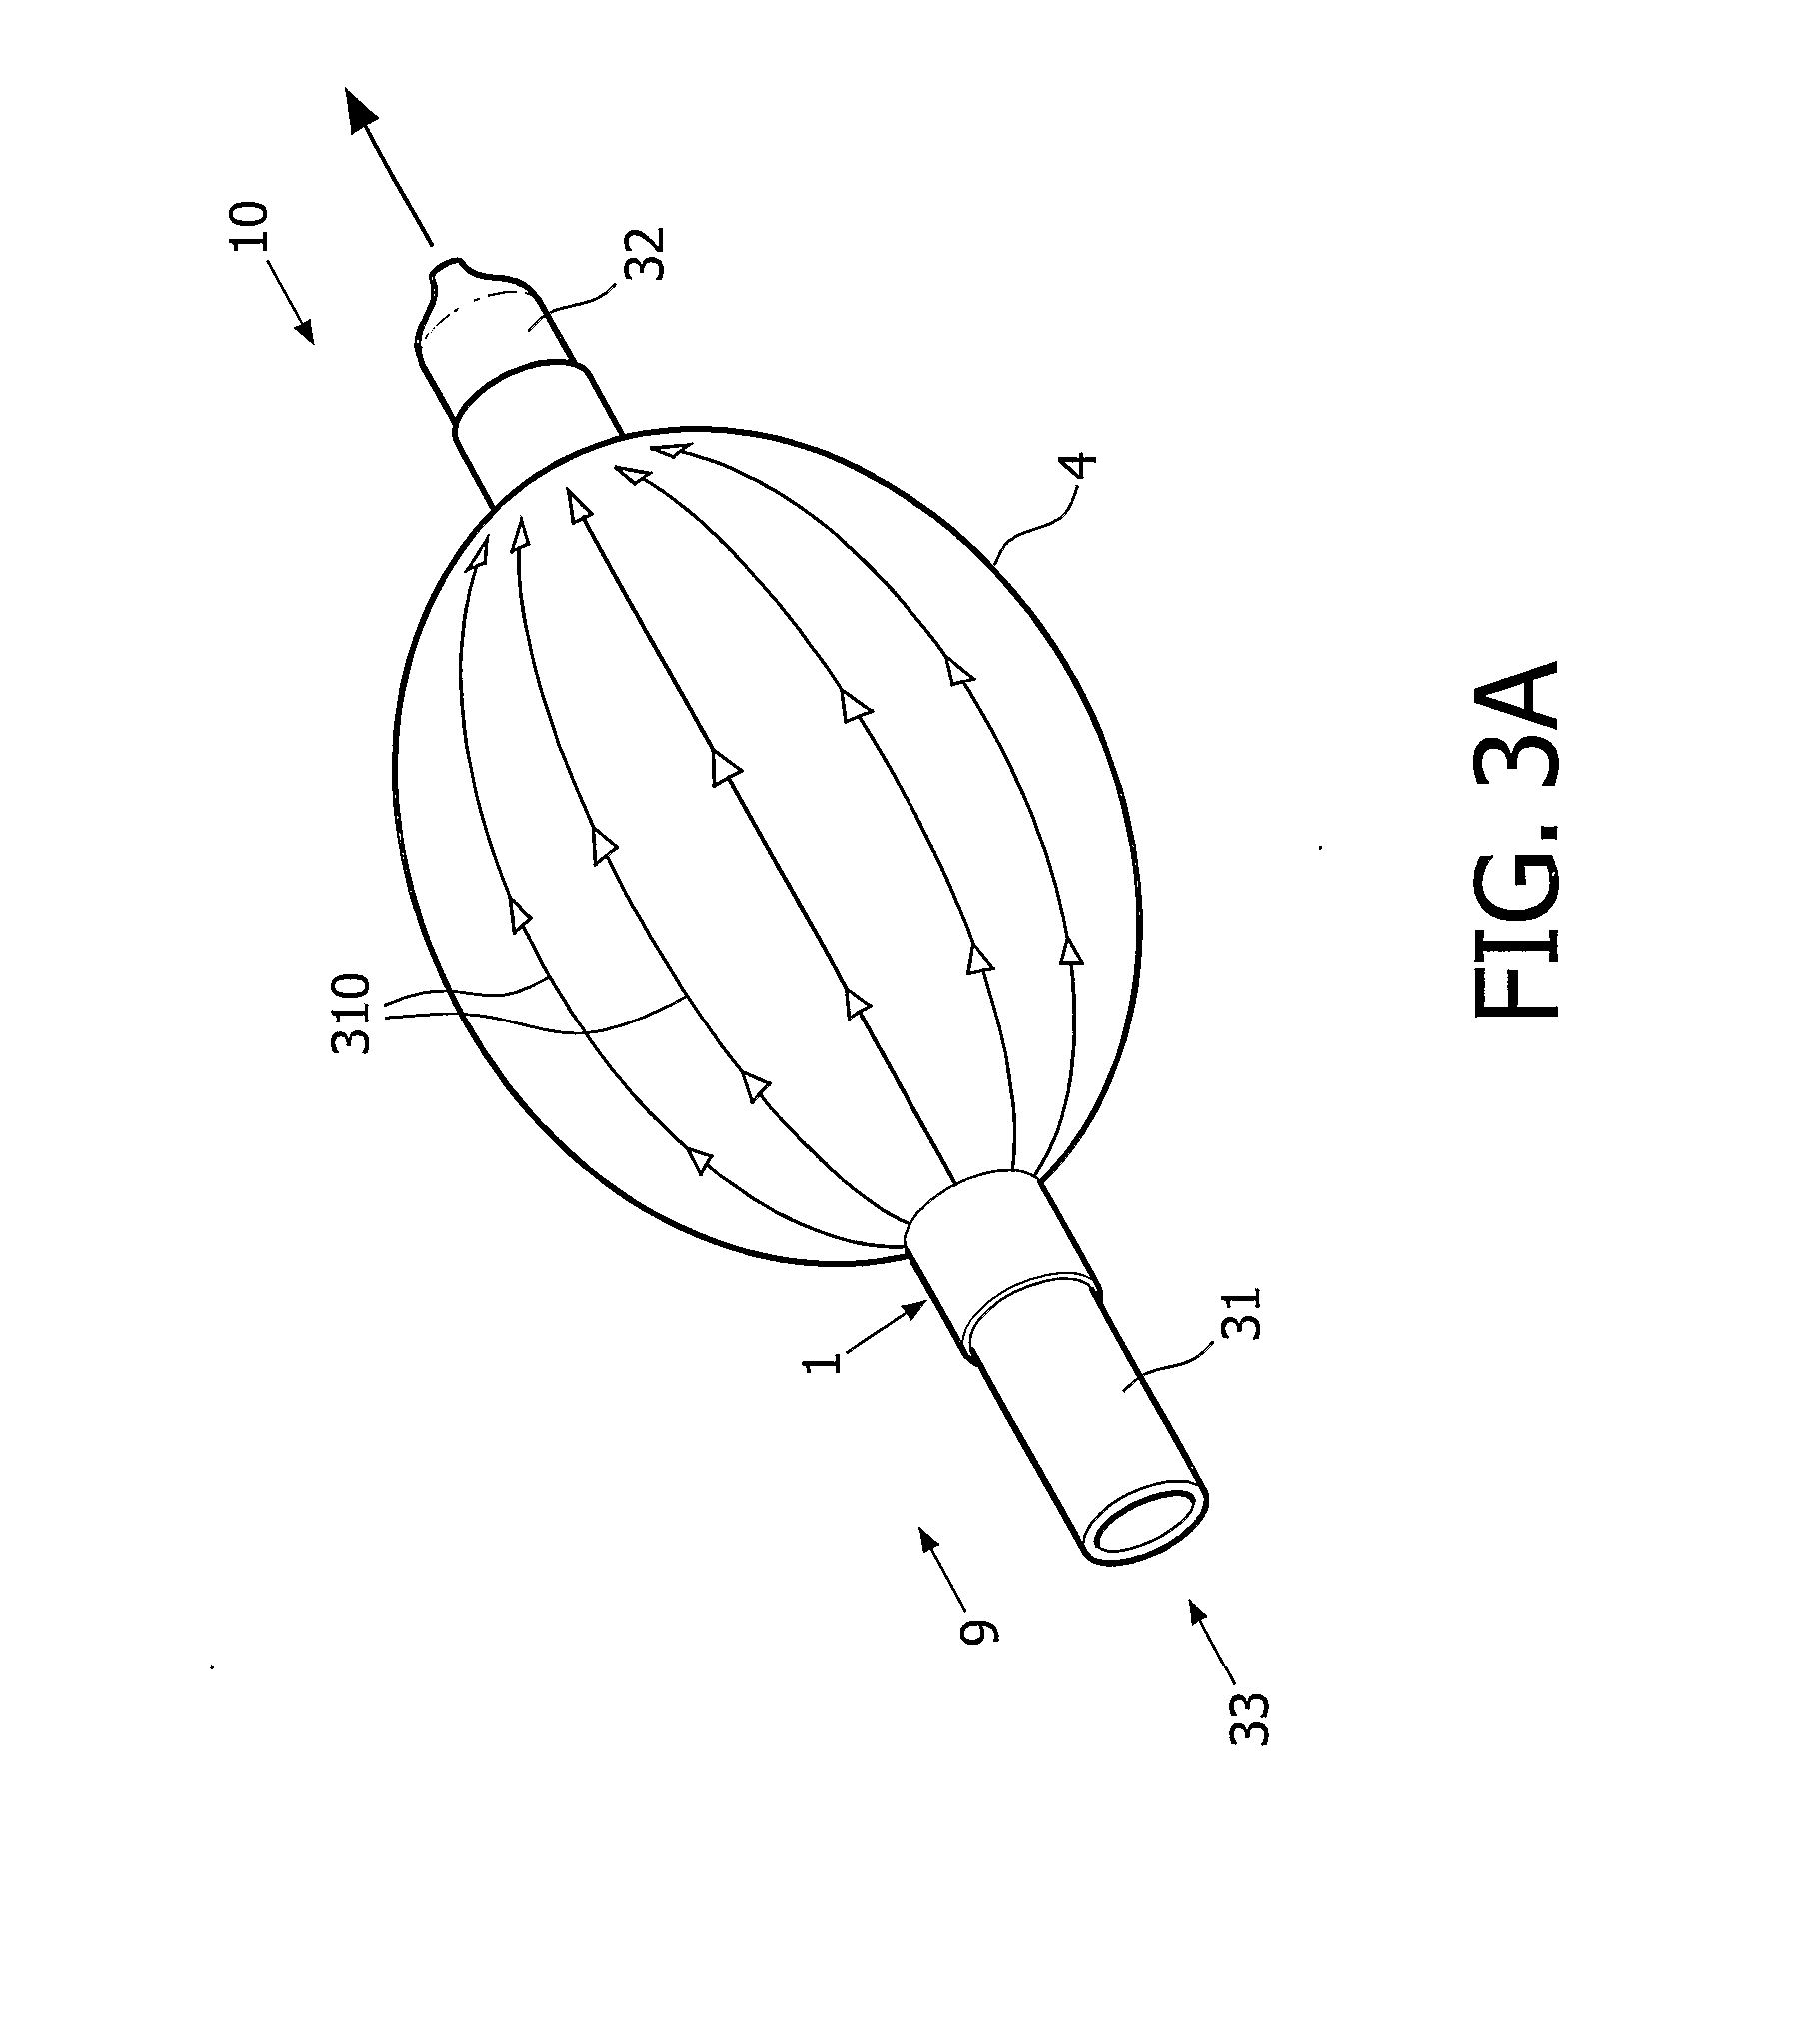 Device and Method For Assisting Heat Ablation Treatment of the Heart